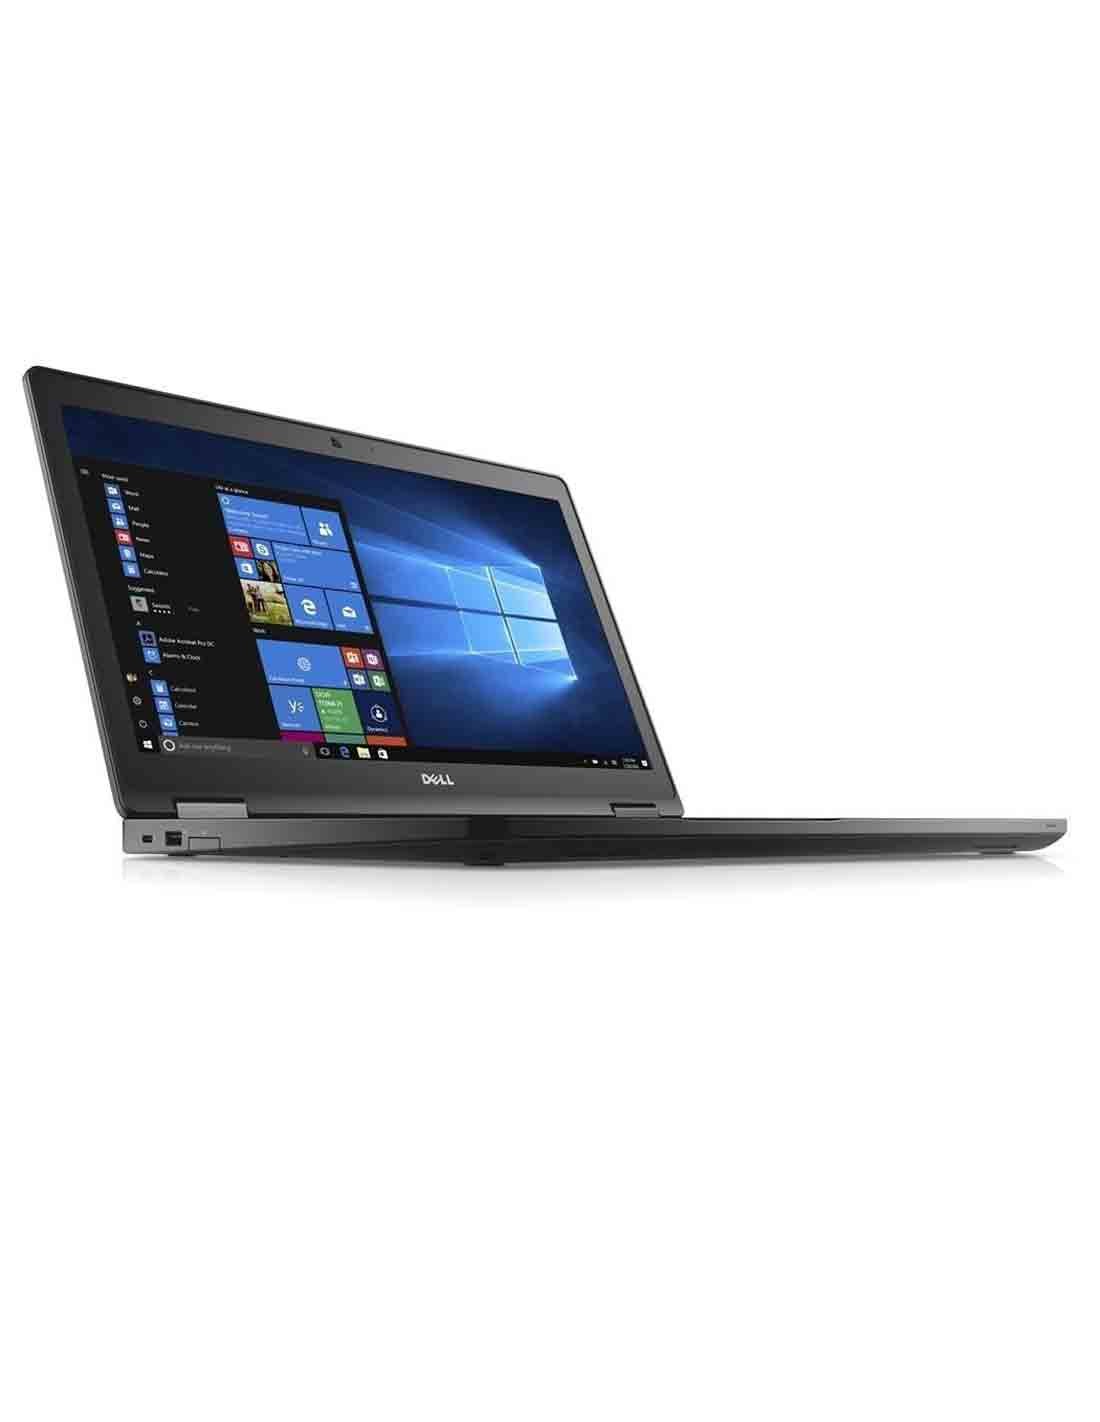 Buy Online Dell Latitude 5580 Core i5 Business Laptop with Best Deal options